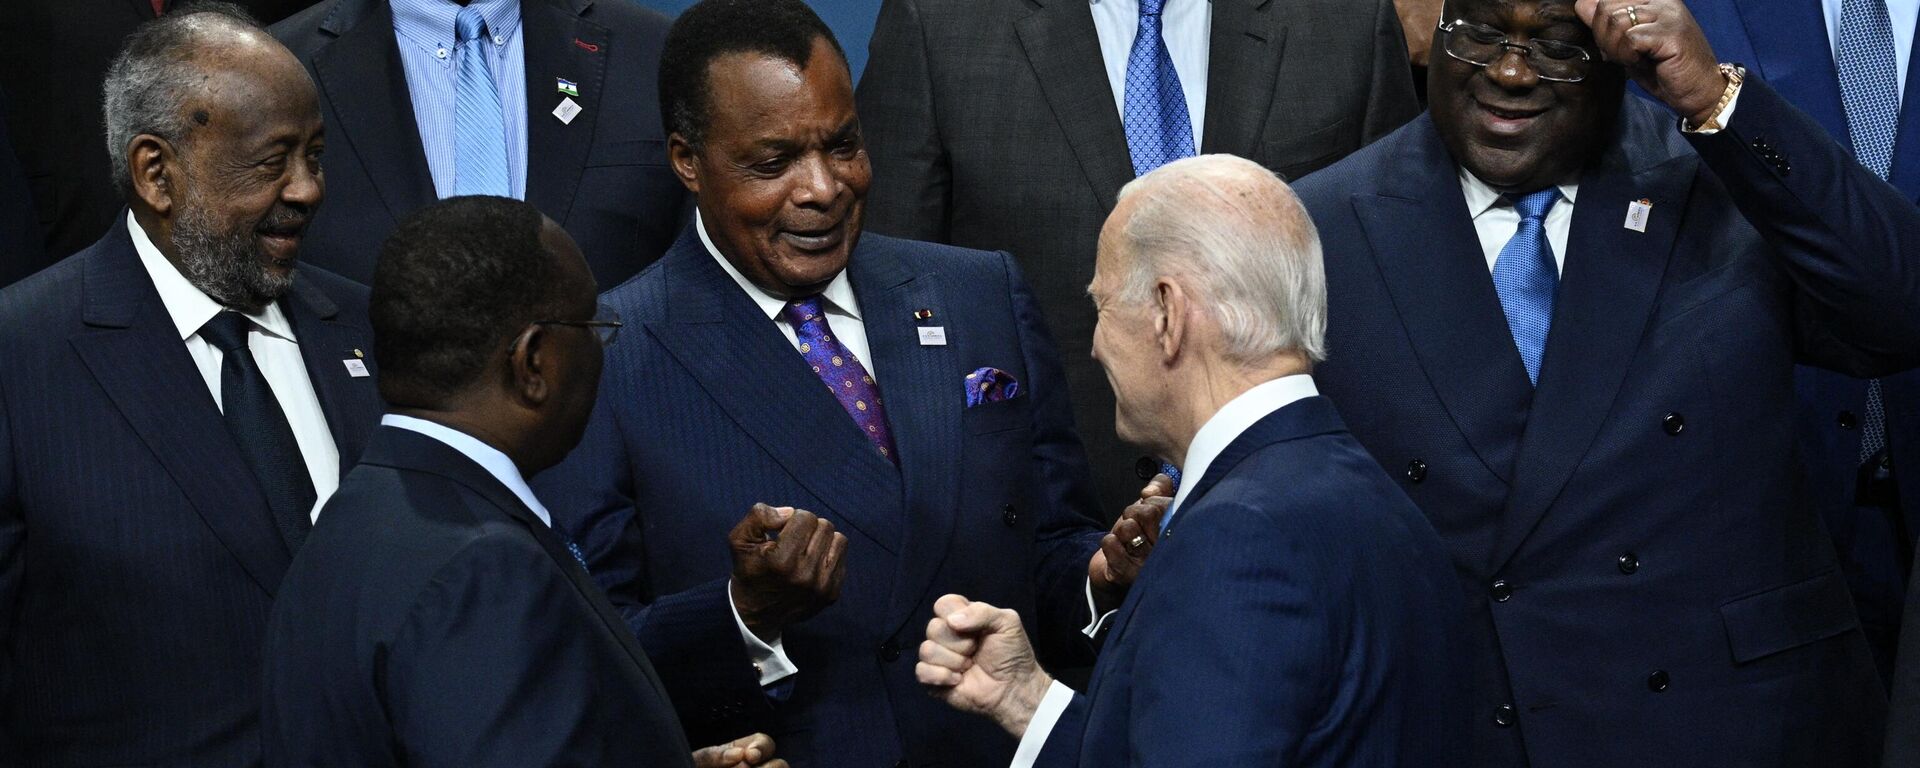 US President Joe Biden participates in a family photo with the leaders of the US-Africa Leaders Summit at the Walter E. Washington Convention Center in Washington, DC, on December 15, 2022. - Sputnik International, 1920, 16.12.2022